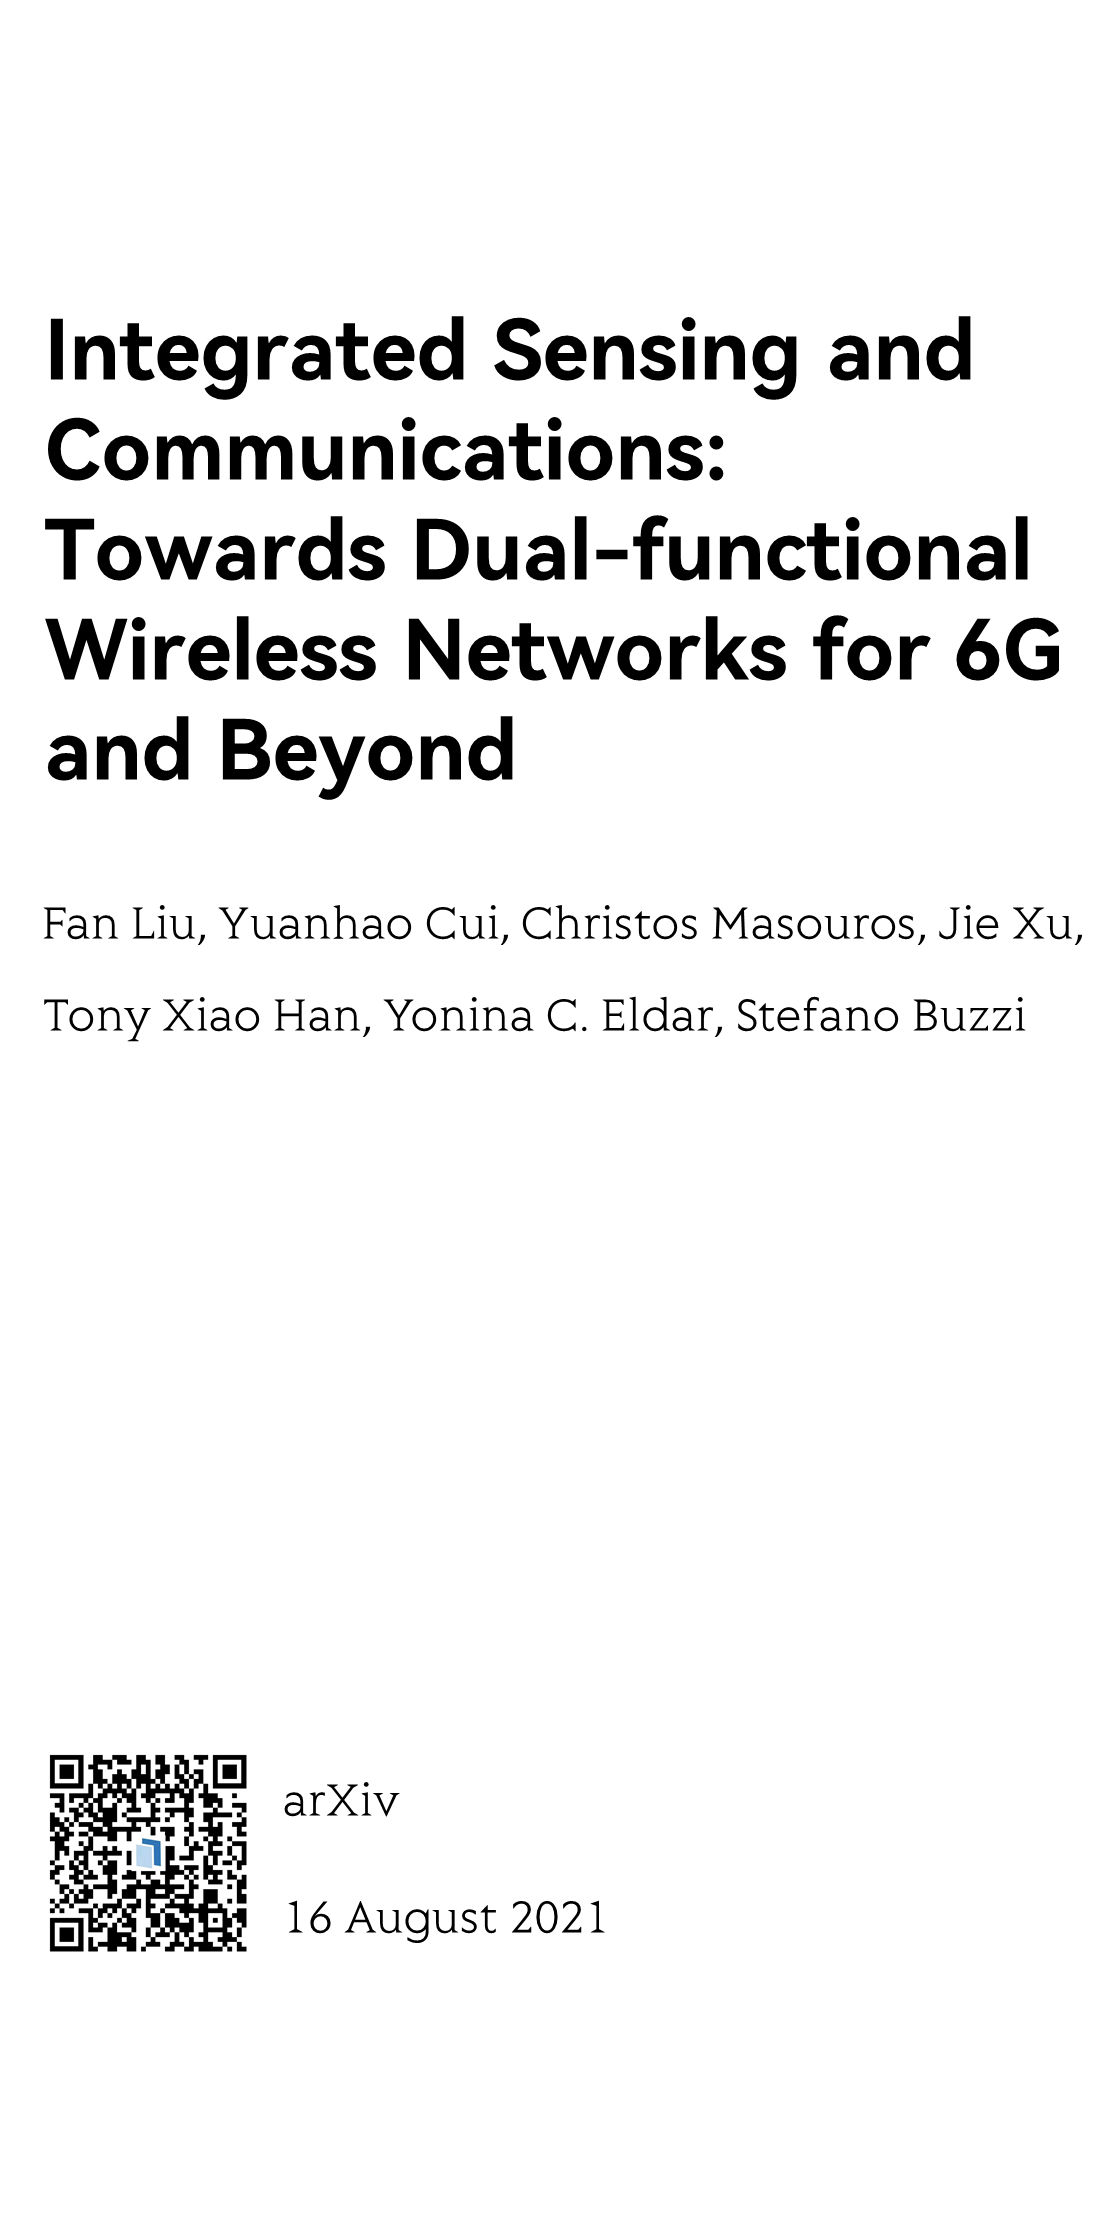 Integrated Sensing and Communications: Towards Dual-functional Wireless Networks for 6G and Beyond_1